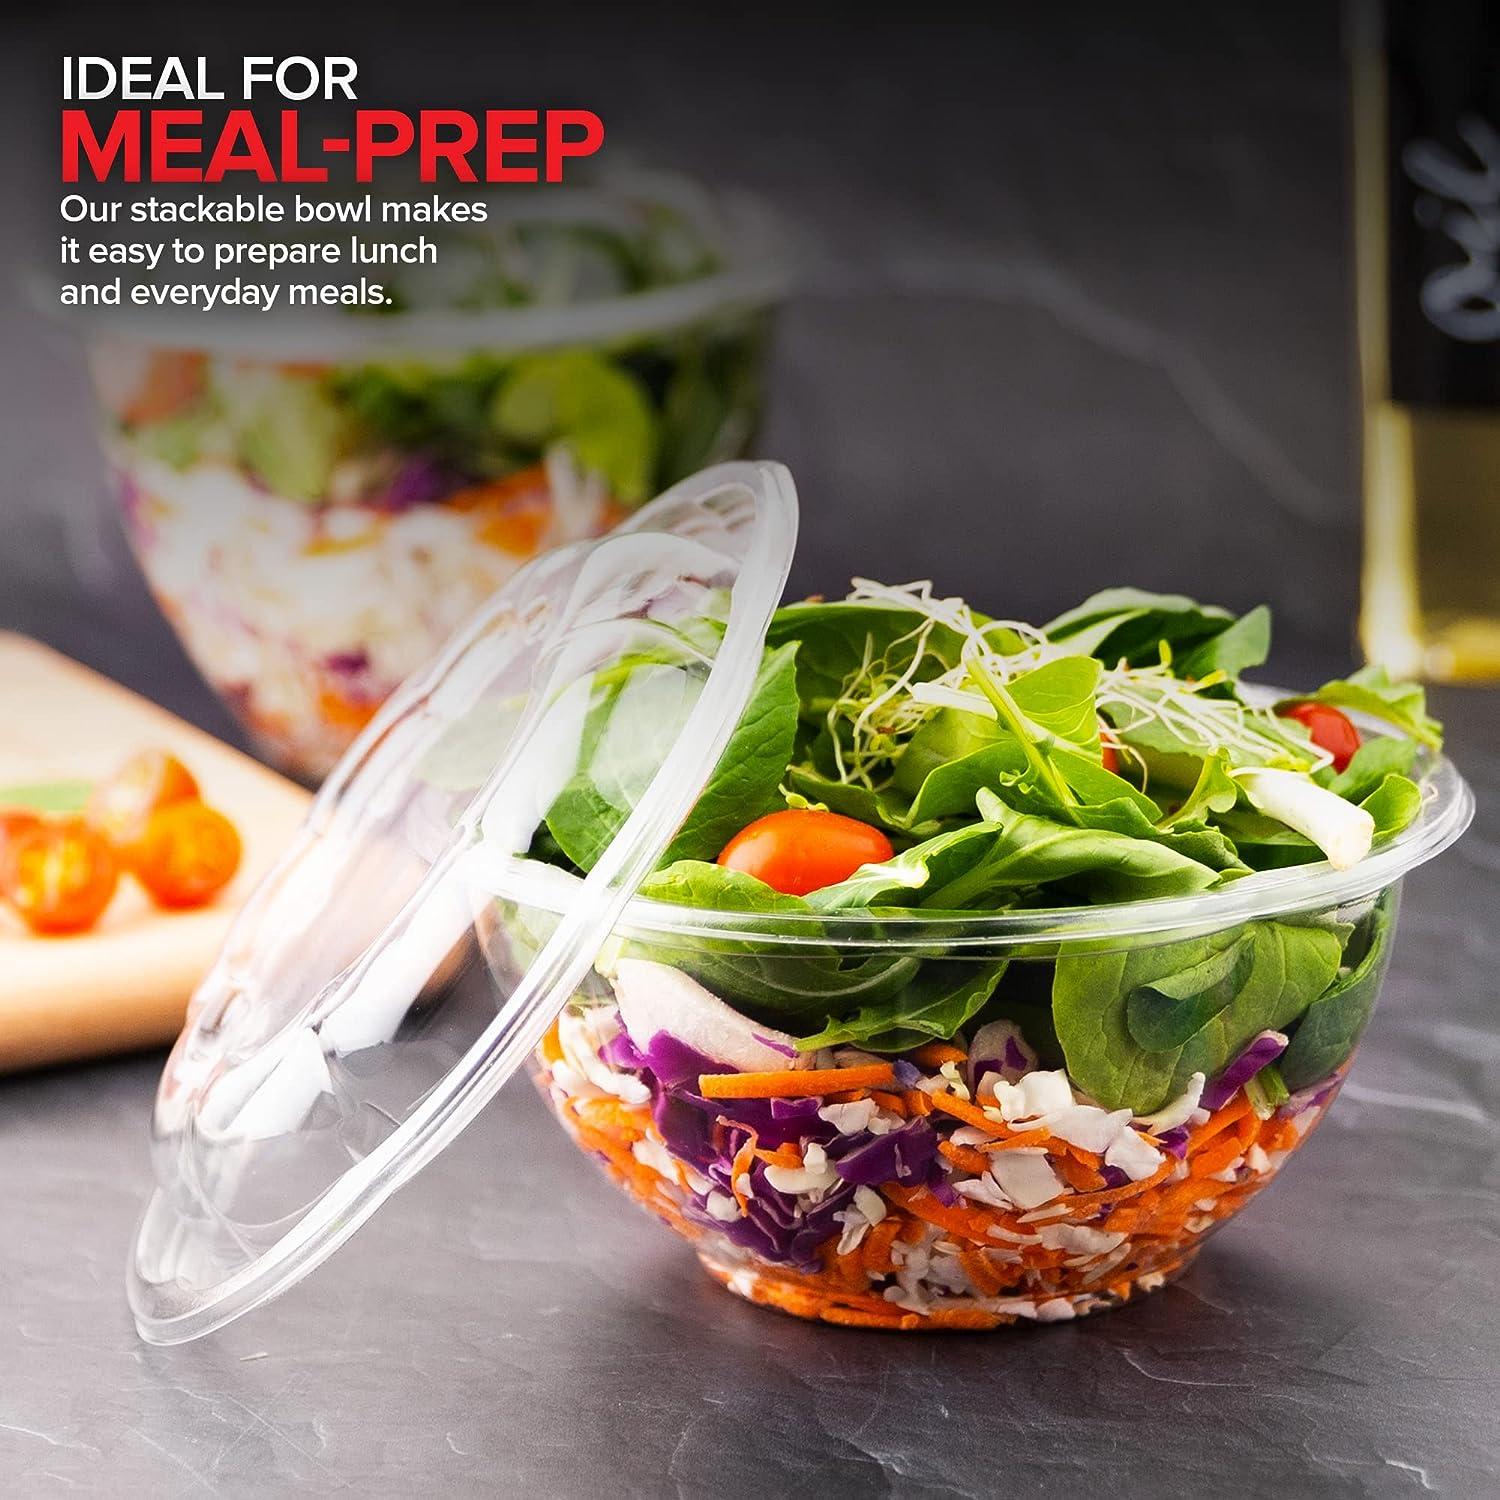 [50 Pack] 64oz Clear Disposable Salad Bowls with Lids - Clear Plastic Disposable Salad Containers for Lunch To-Go, Salads, Fruits, Airtight, Leak